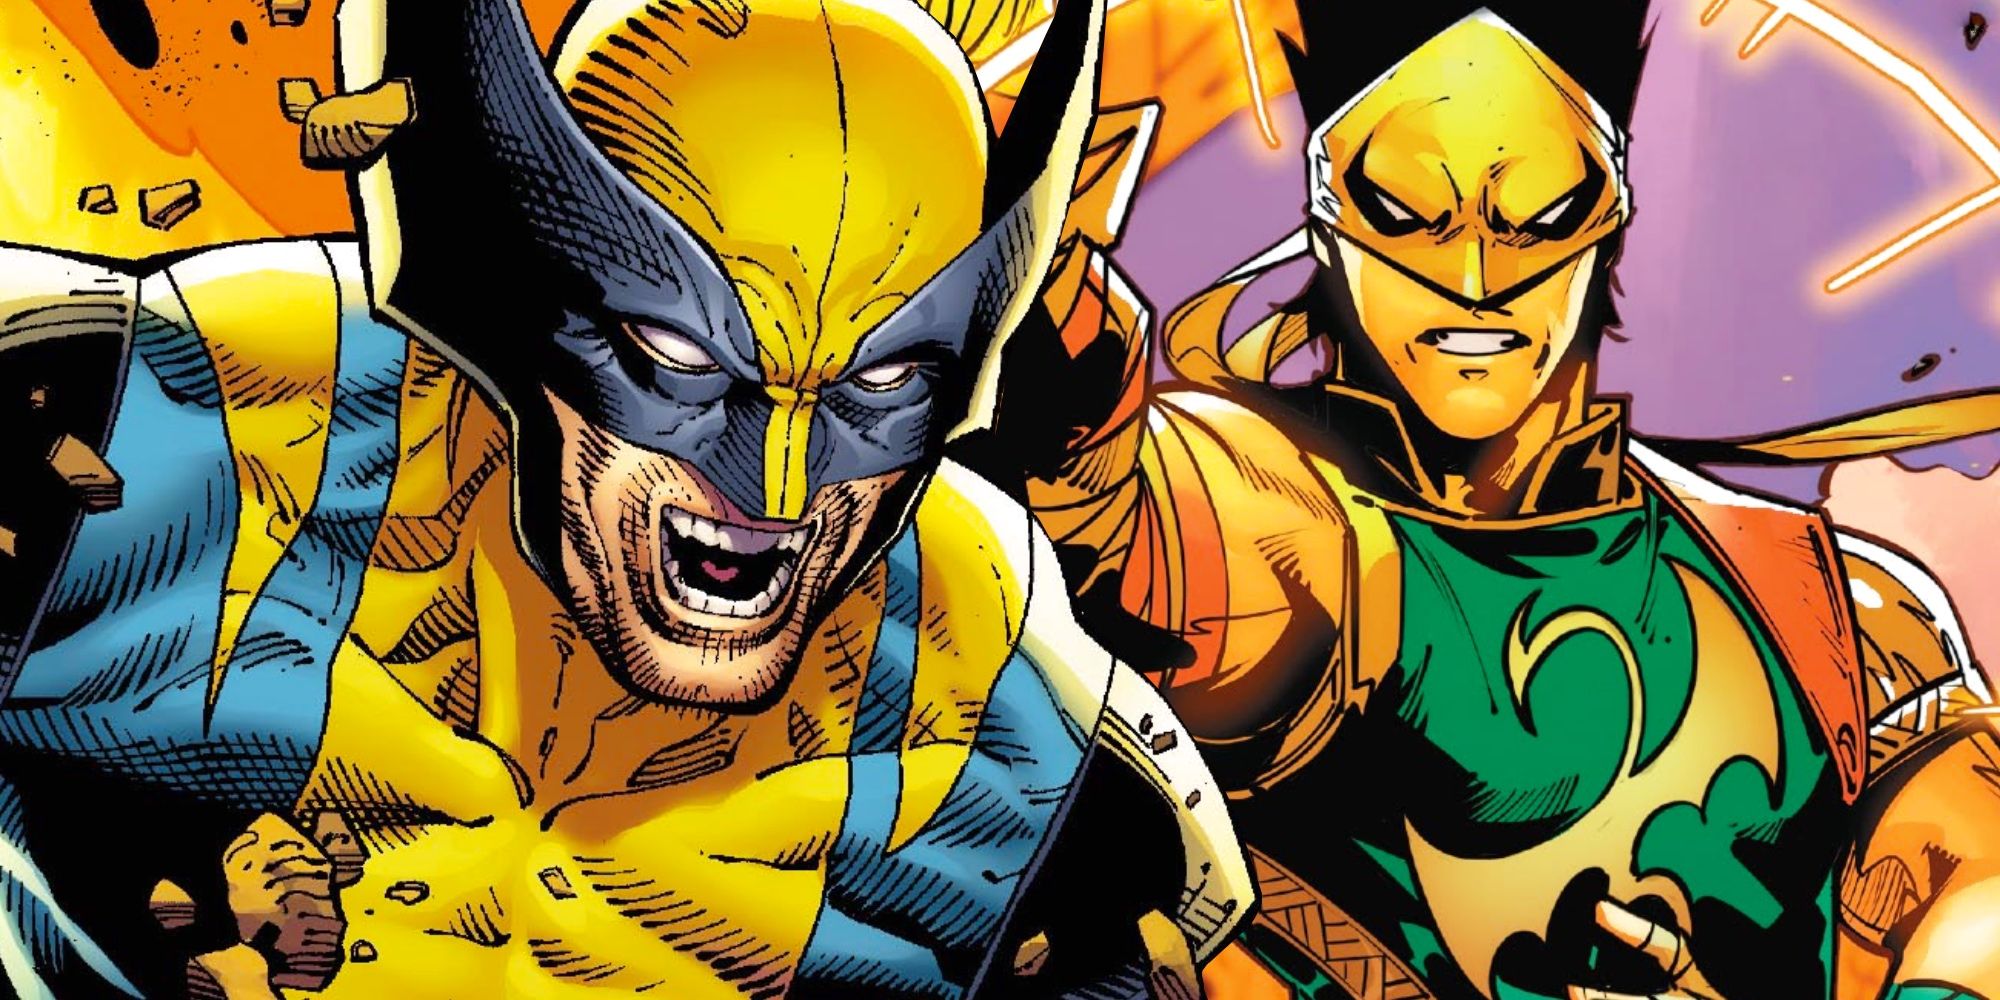 Iron Fist and Wolverine in Marvel Comics